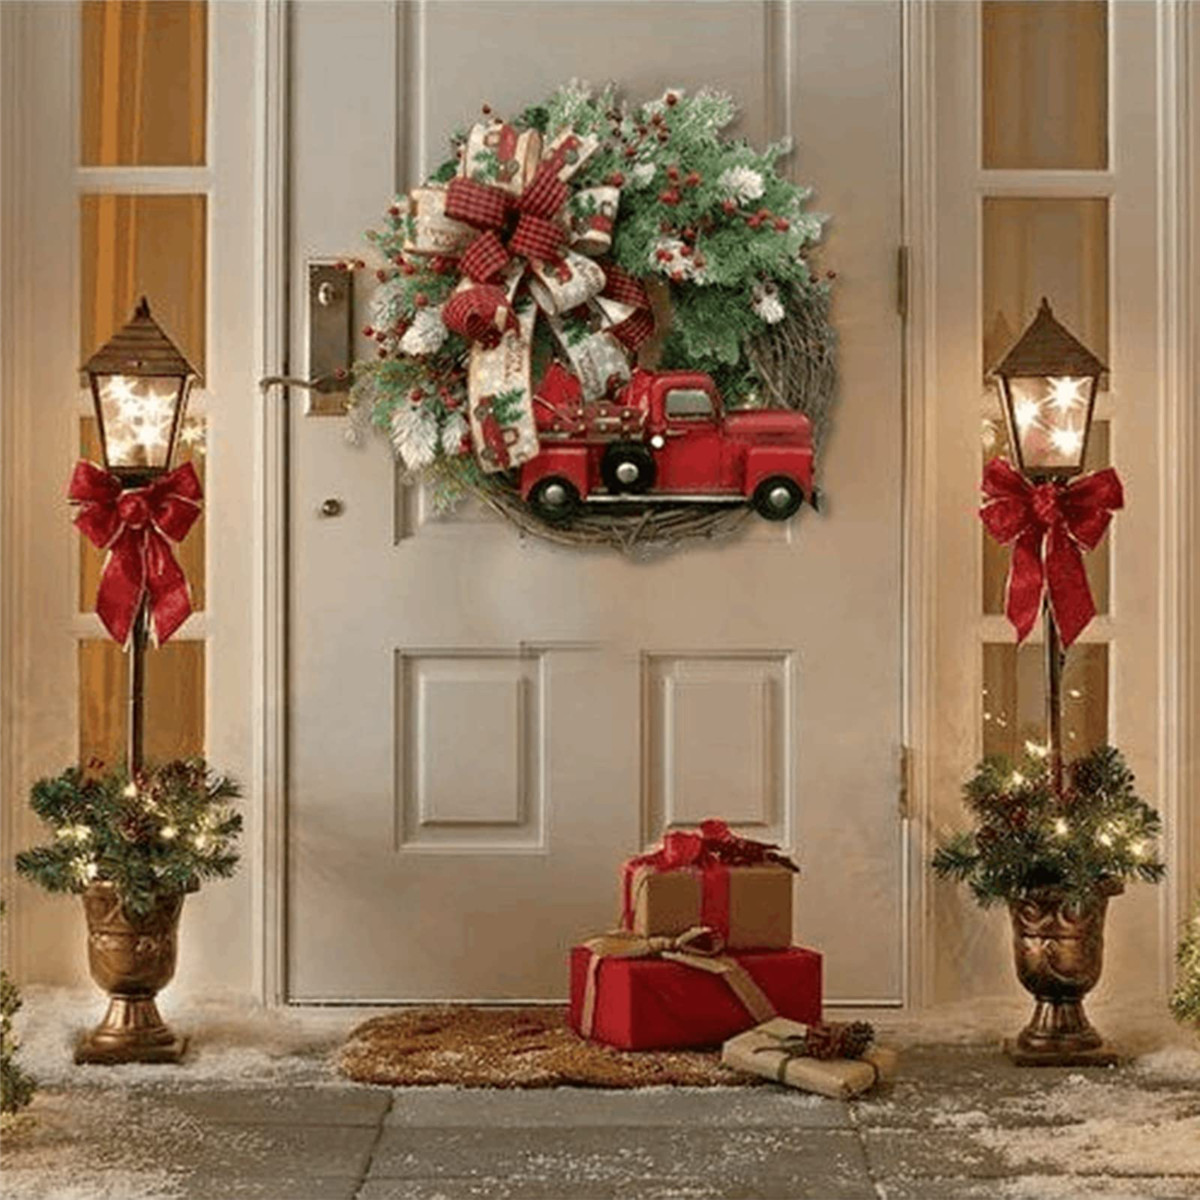 14" Red Truck Christmas Wreath-Vintage Truck Berry Autumn Wreath at The Front Door-Wooden Hanging Wreath for Indoor and Outdoor Decoration - image 5 of 7